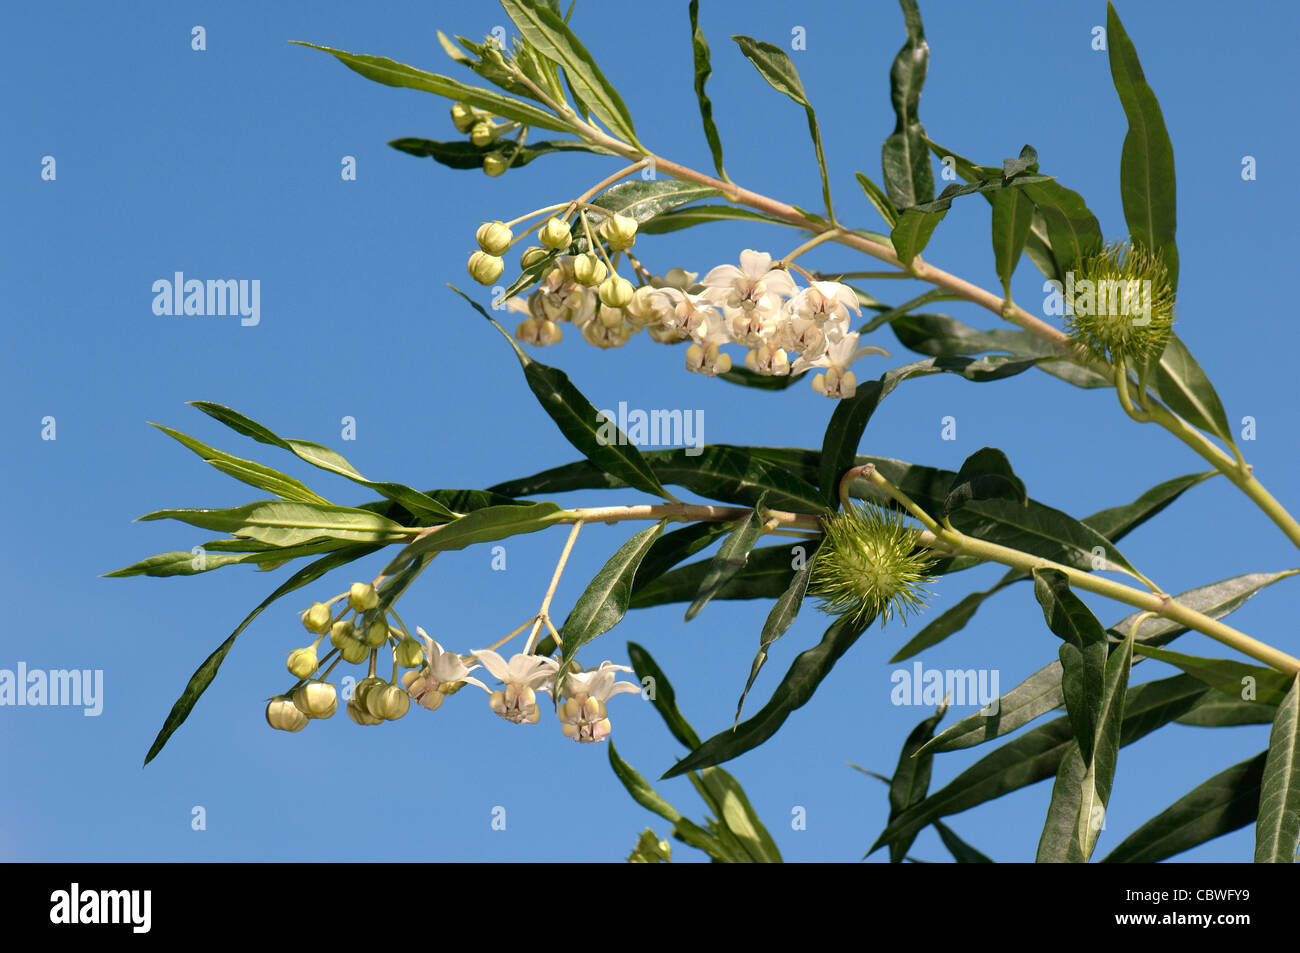 Balloonplant (Asclepias physocarpa), twigs with flowers and fruit. Stock Photo